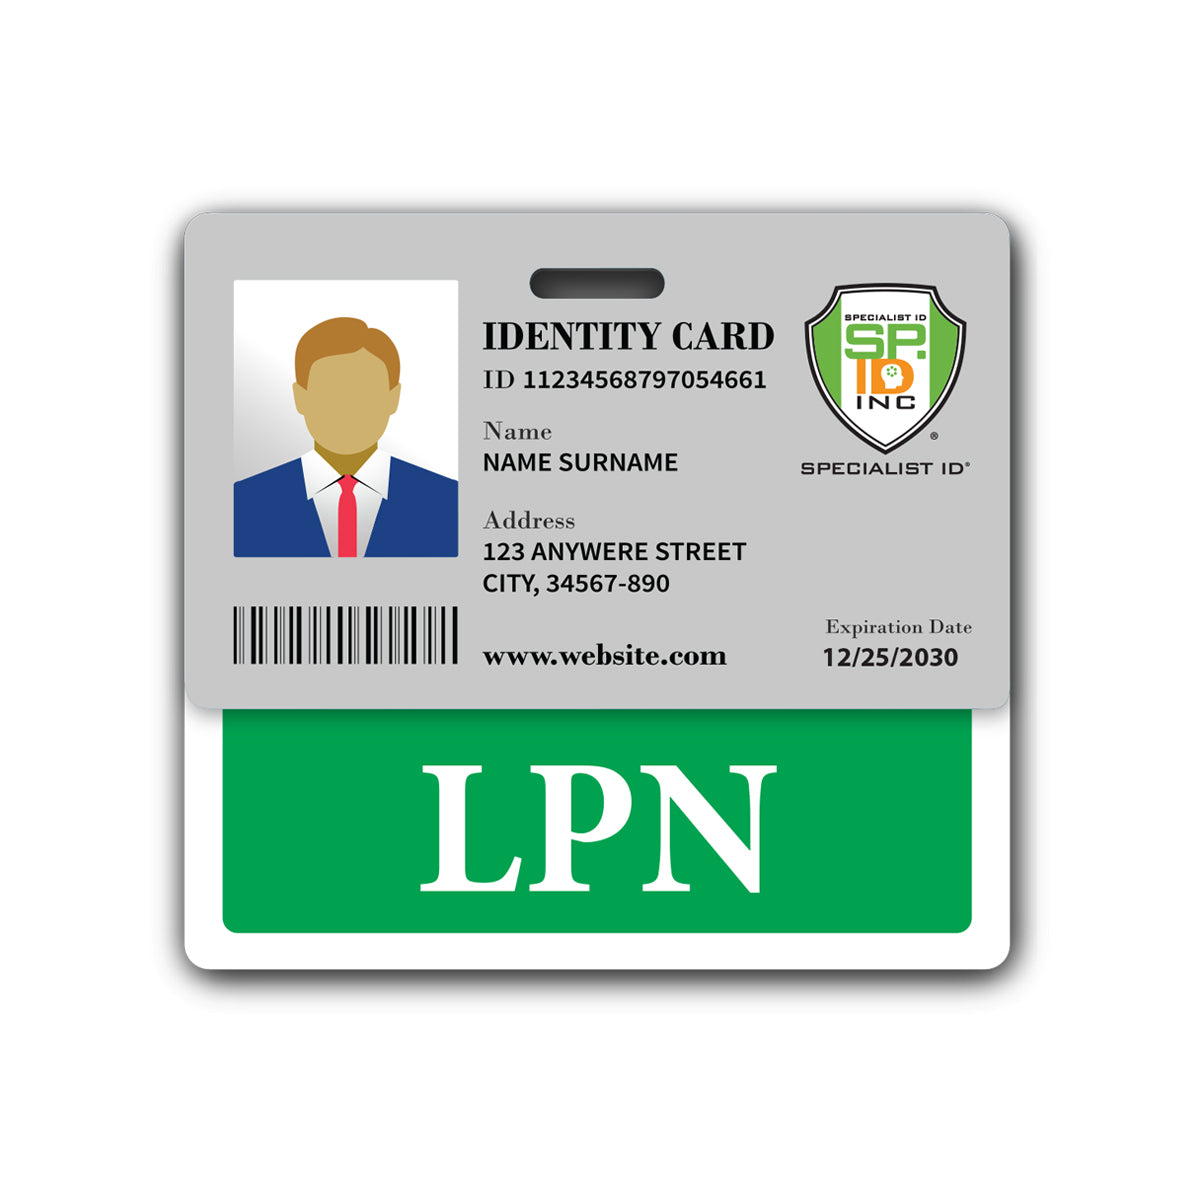 An identity card displays a photo silhouette, ID number, name, address, website, an expiration date of 12/25/2030, and LPN designation on a green background. This LPN Horizontal Badge Buddy with Green Border enhances role recognition in the hospital environment.